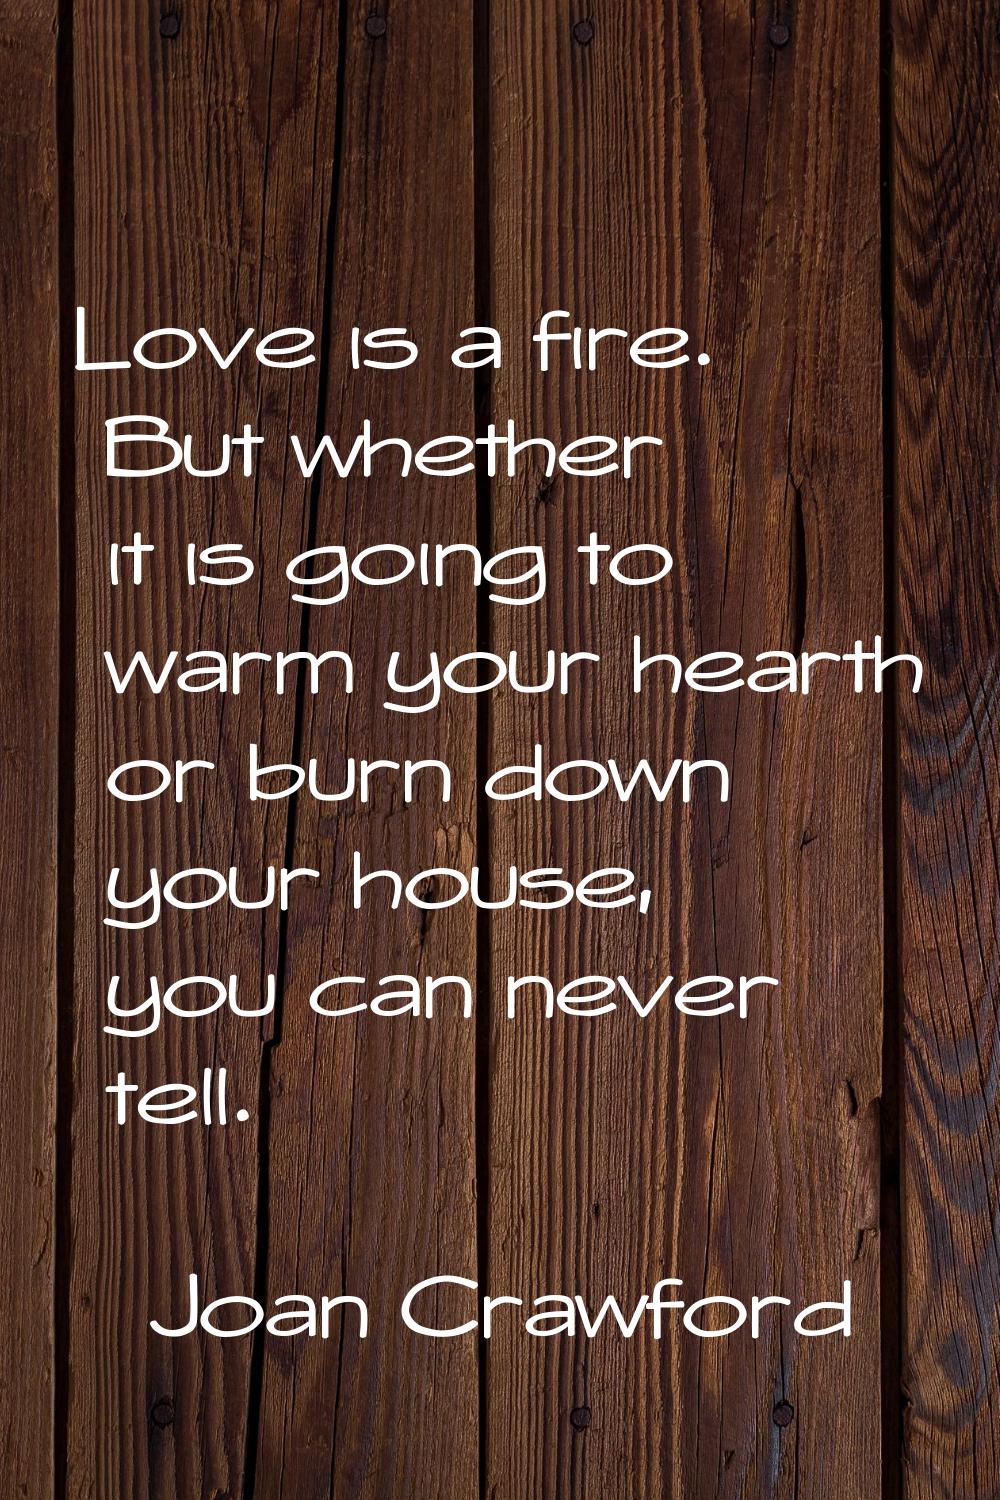 Love is a fire. But whether it is going to warm your hearth or burn down your house, you can never 